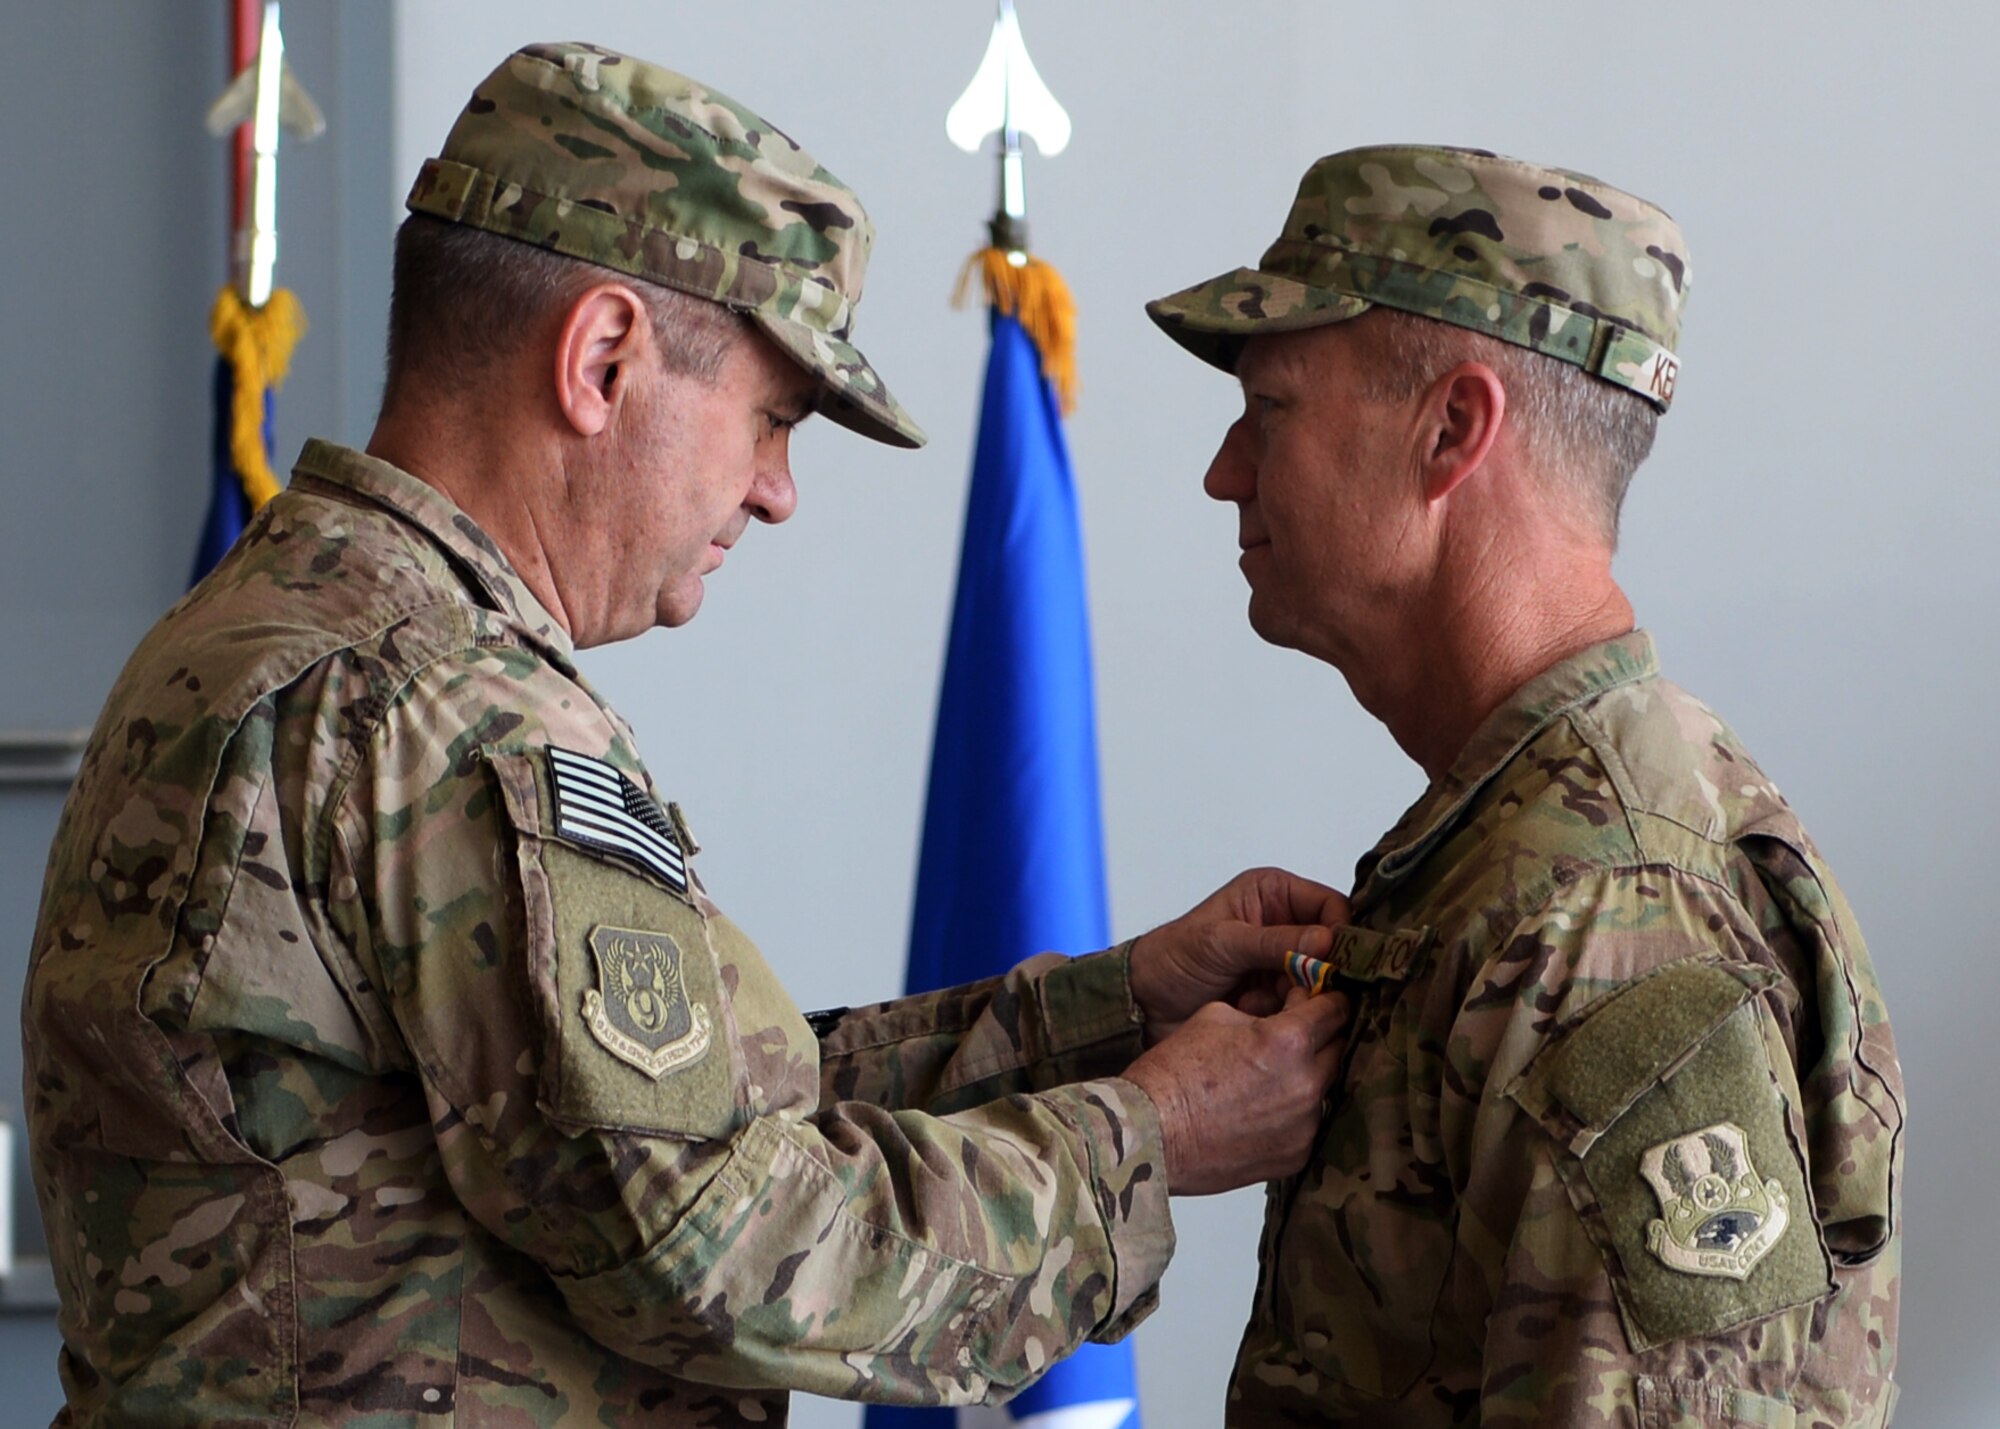 U.S. Air Force Maj. Gen. Scott West, 9th Air and Space Expeditionary Task Force-Afghanistan commander, pins a defense superior service medal on Brig. Gen. Mark Kelly, now former 455th Air Expeditionary Wing commander, during a change of command ceremony July 1, 2015 at Bagram, Airfield, Afghanistan. Kelly relinquished command to Brig. Gen. Dave Julazadeh. (U.S. Air Force photo by Senior Airman Cierra Presentado/Released)